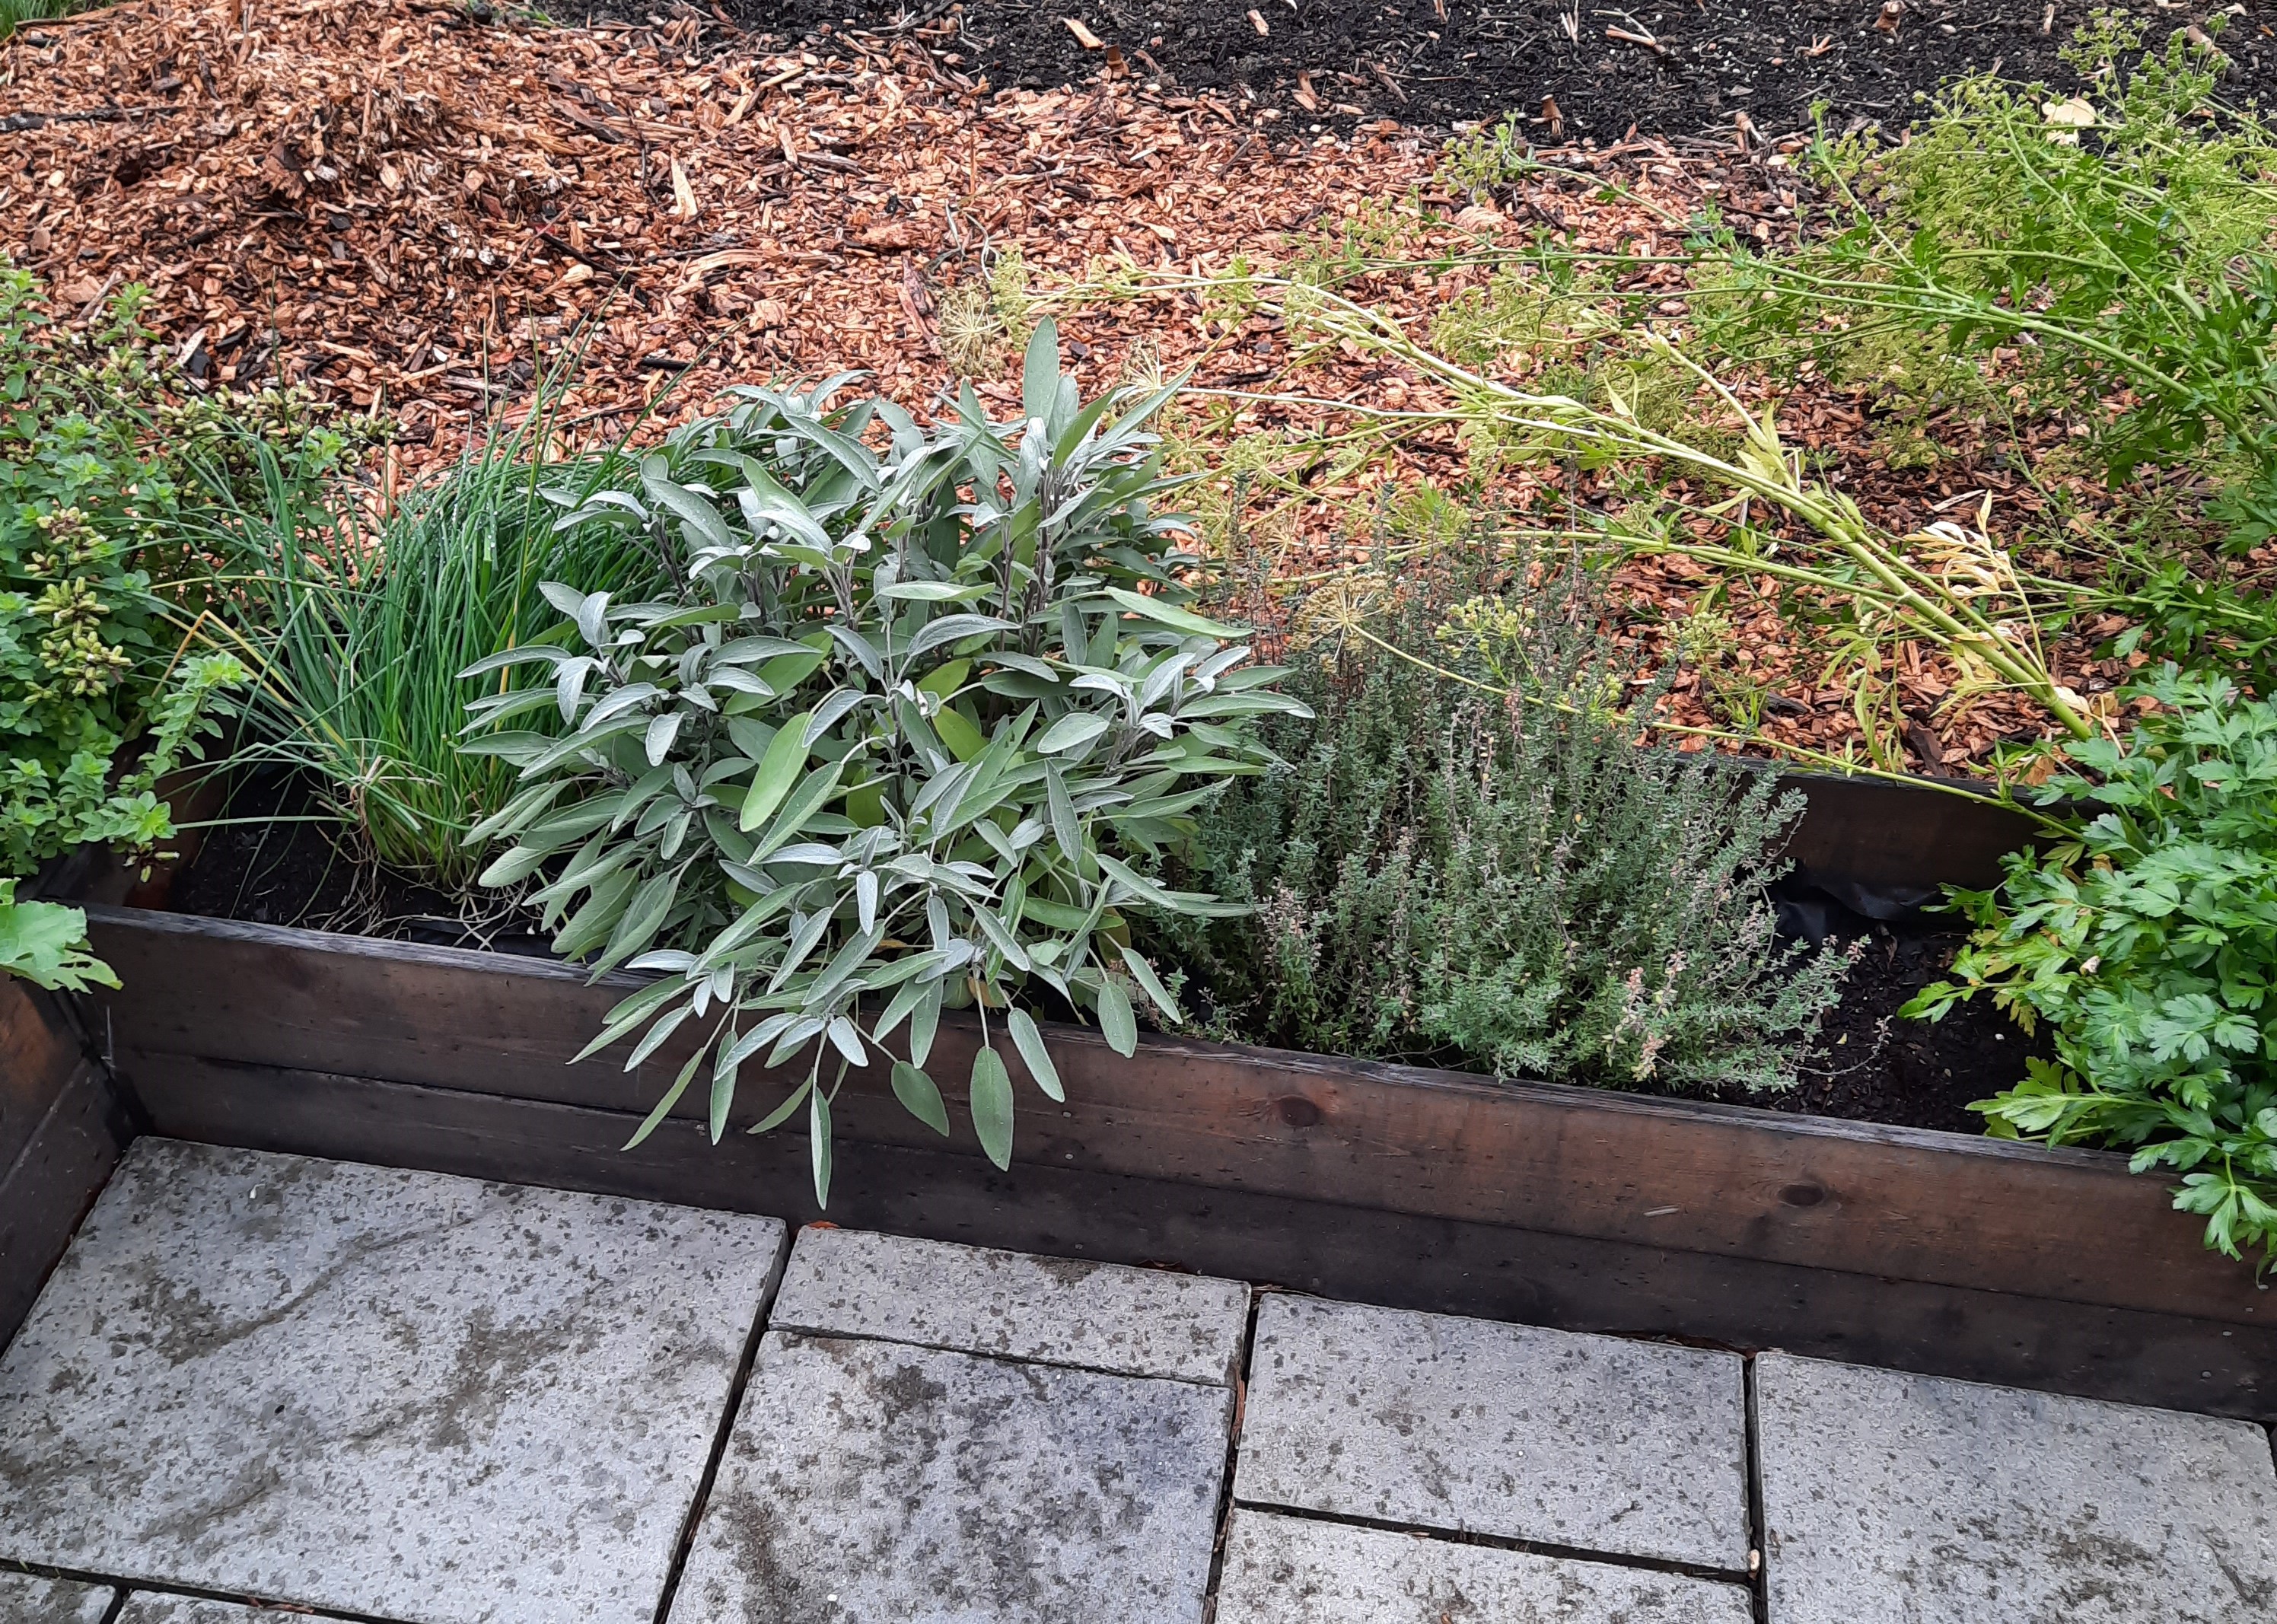 Various herb plants in a raised wooden garden bed